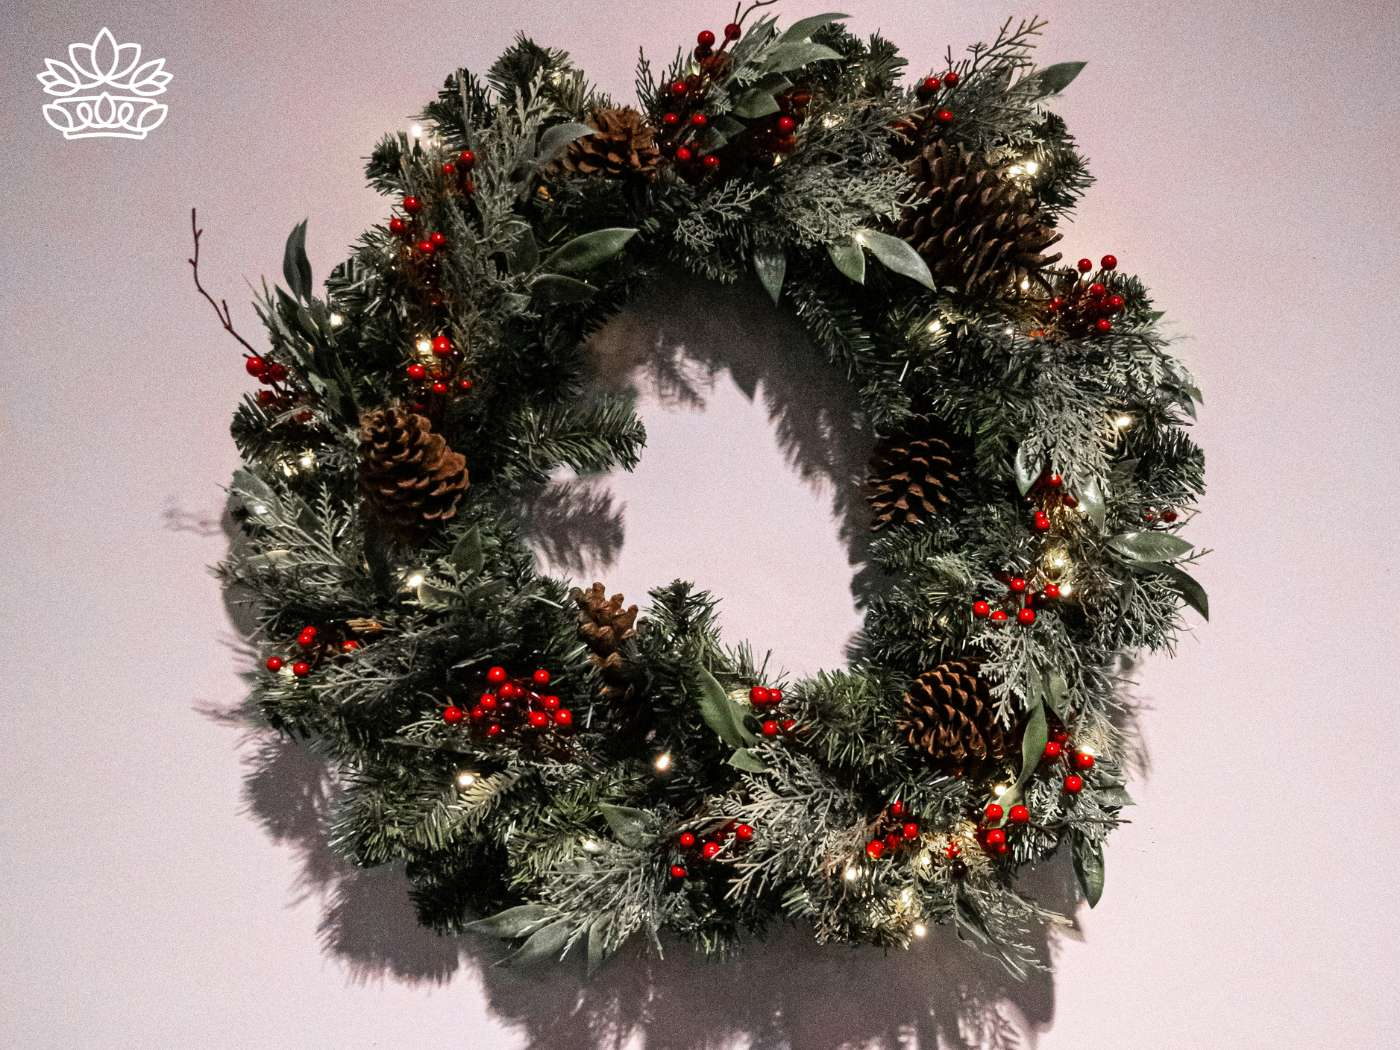 A beautifully assembled wreath form adorned with sprigs of green, floral wire, pine cones, and a ribbon, offering creative ideas for seasonal wreath-making, part of the Christmas Wreaths and Flowers Collection at Fabulous Flowers and Gifts.